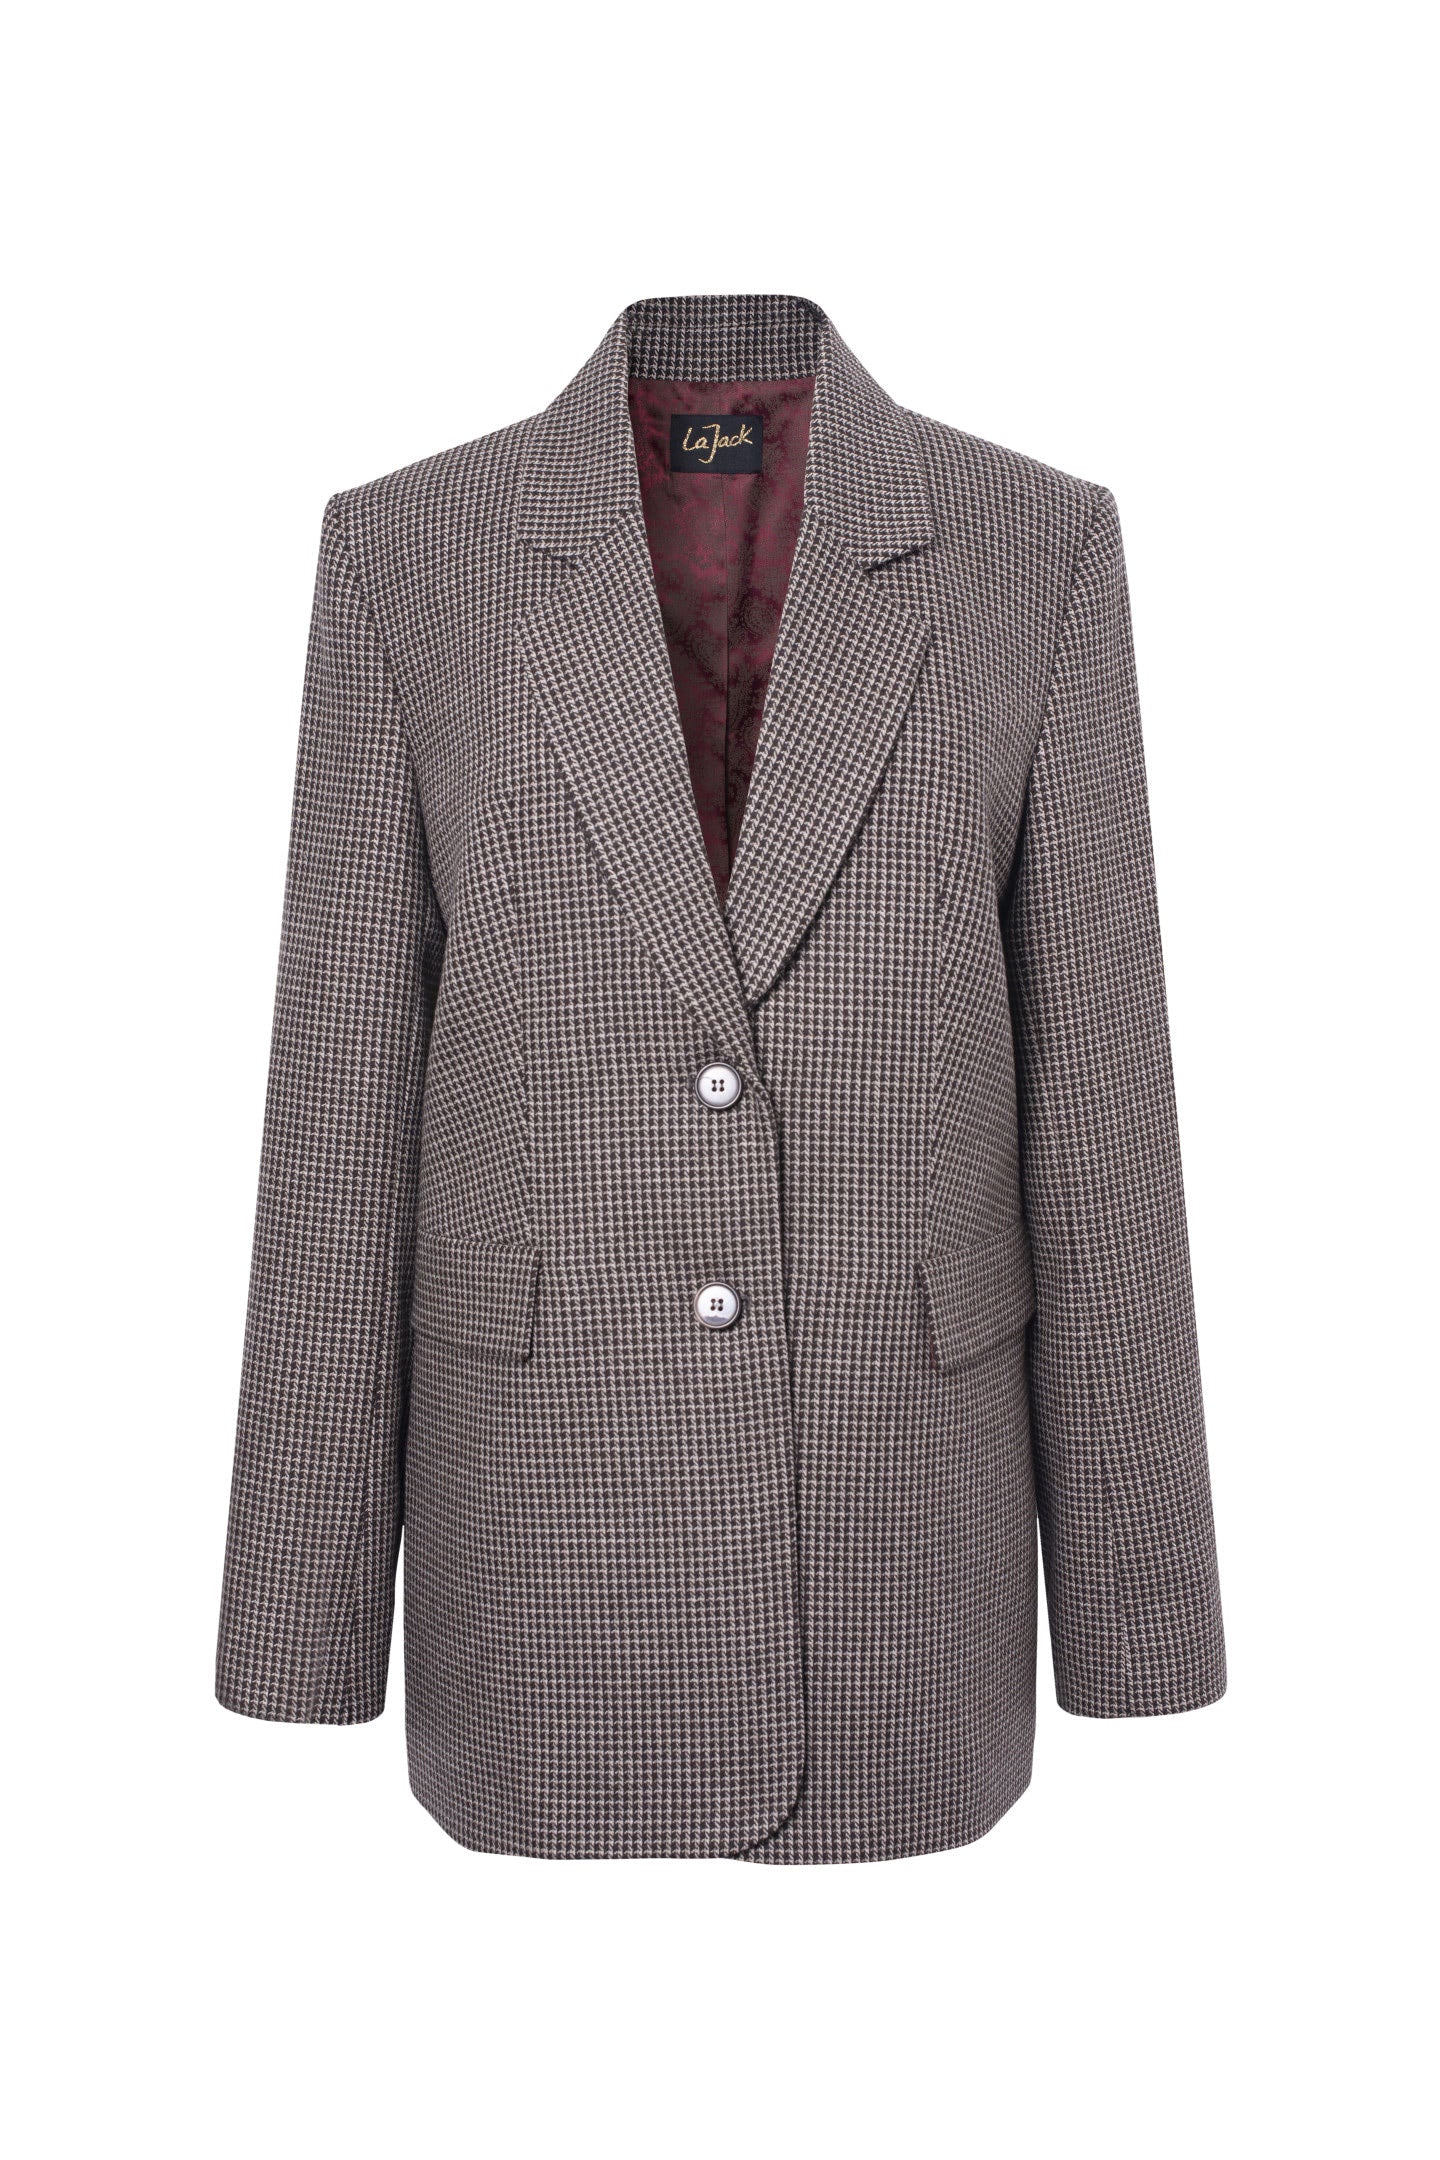 La Cary - Brown Wool &amp; Cashmere Oversized Blazer Jacket wine red cashmere lining